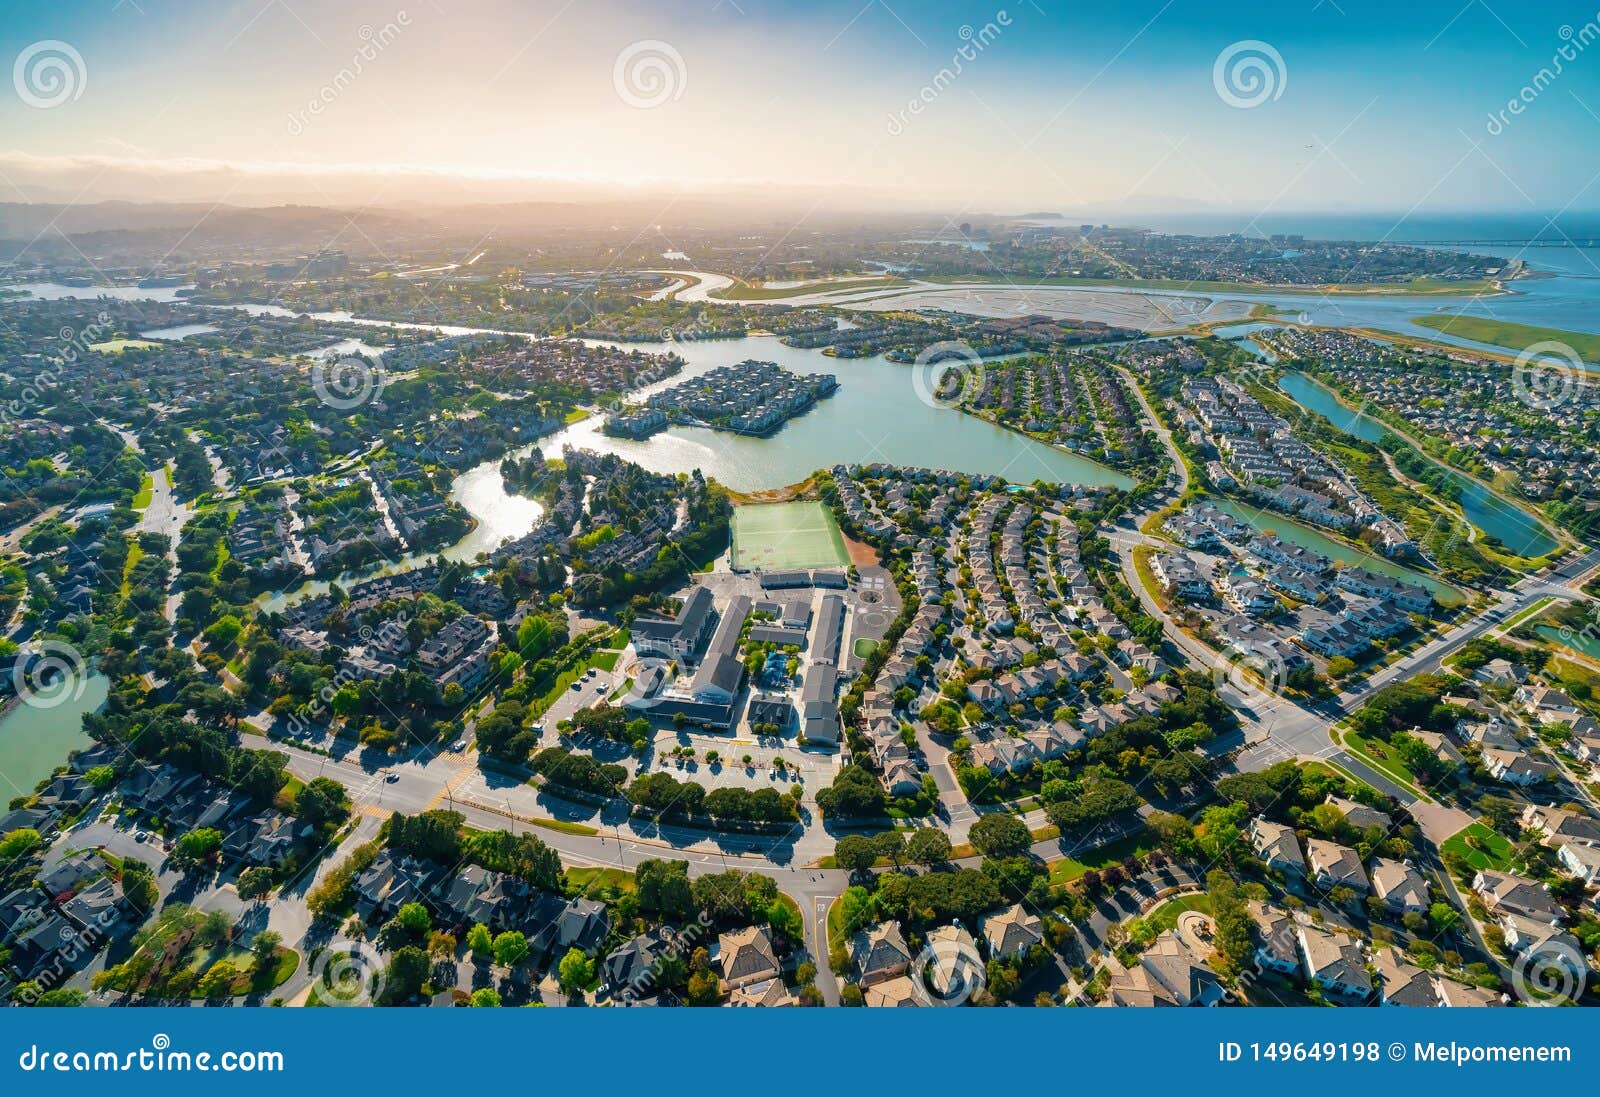 aerial view of residential foster city, ca